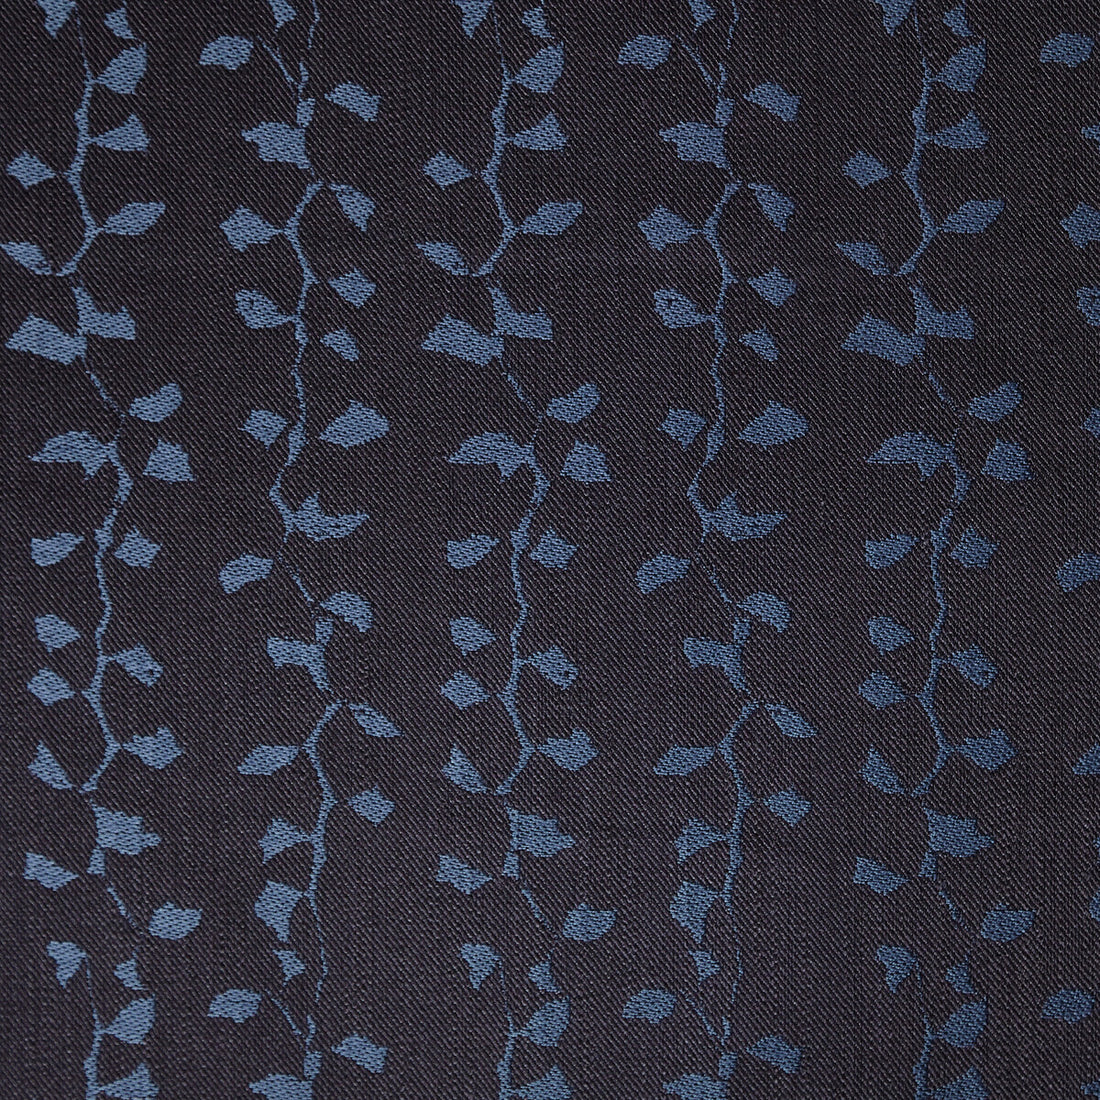 Jungle fabric in midnight color - pattern GWF-3203.568.0 - by Lee Jofa Modern in the Allegra Hicks Islands collection